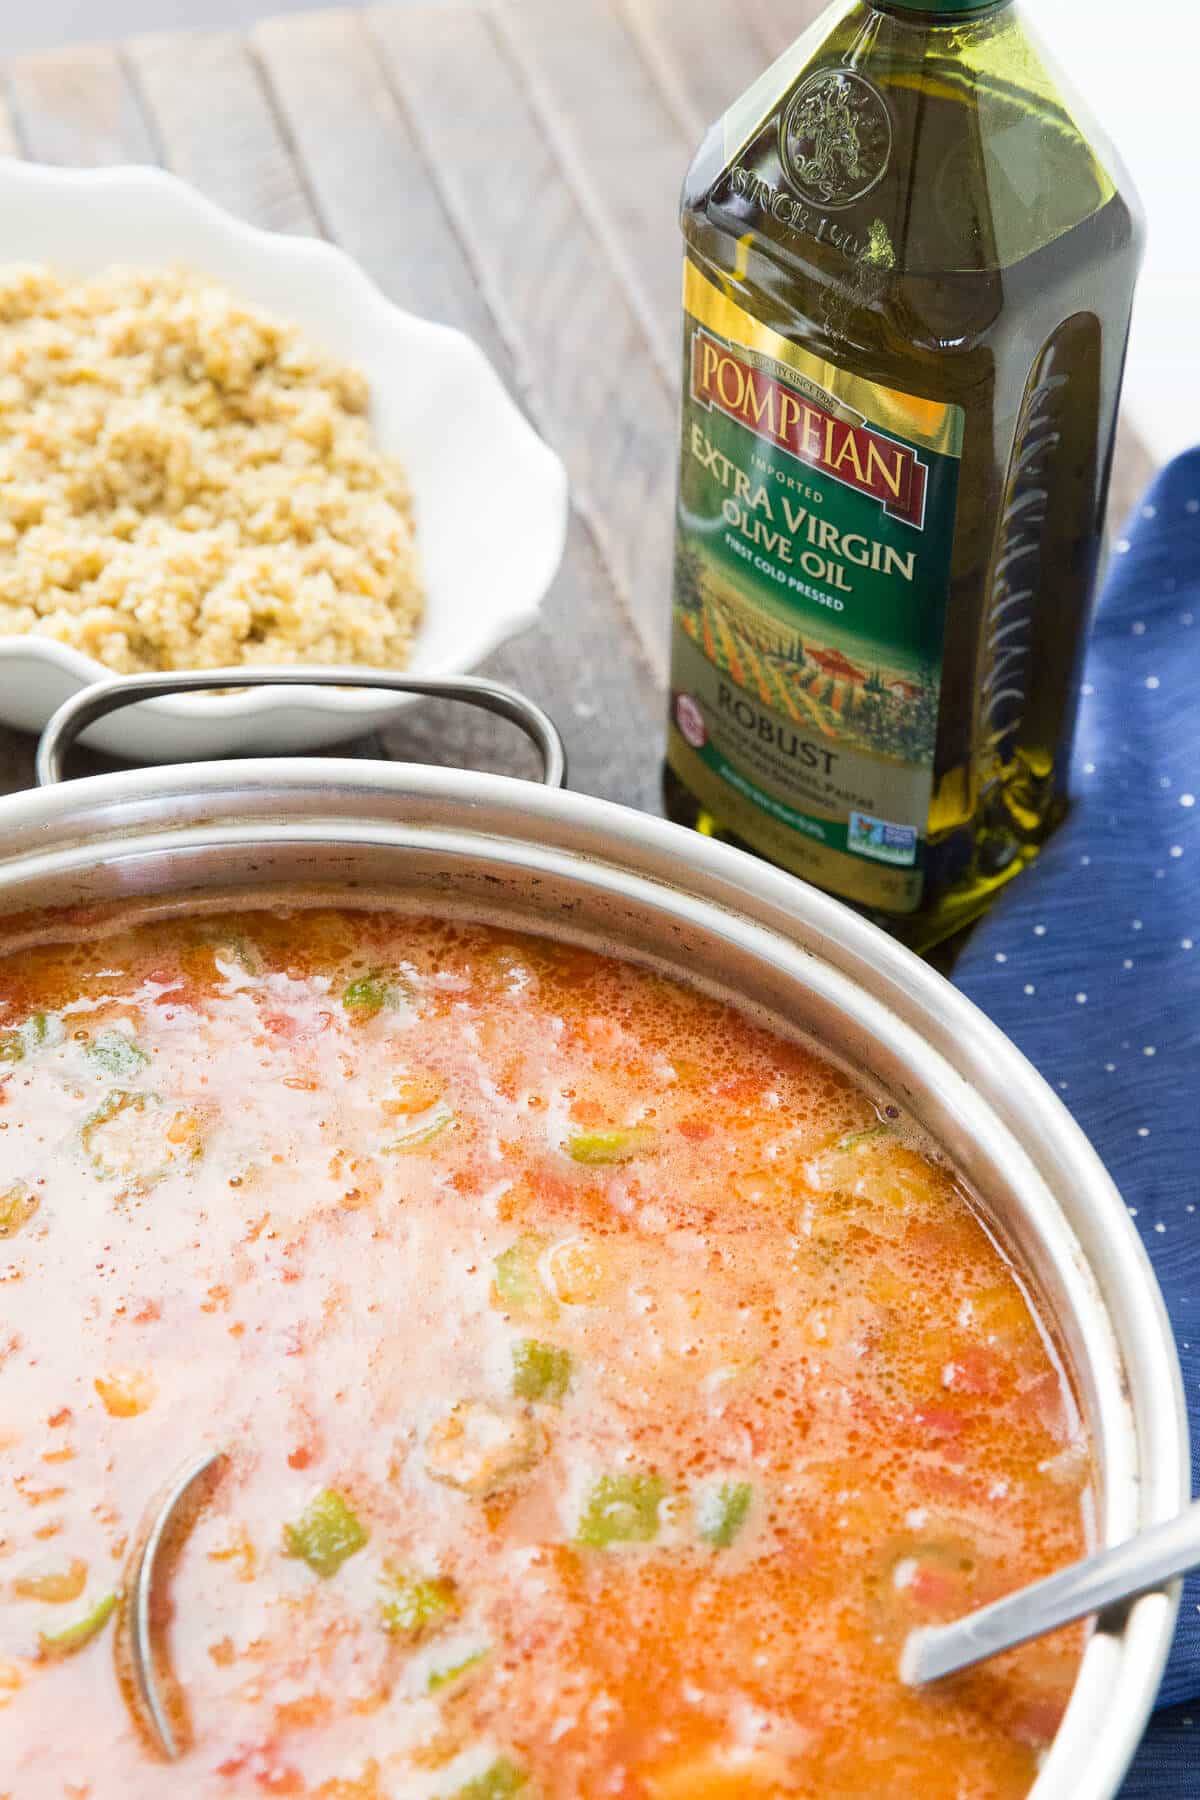 This easy gumbo recipe is going to go quickly! Everyone will love this filling meal!